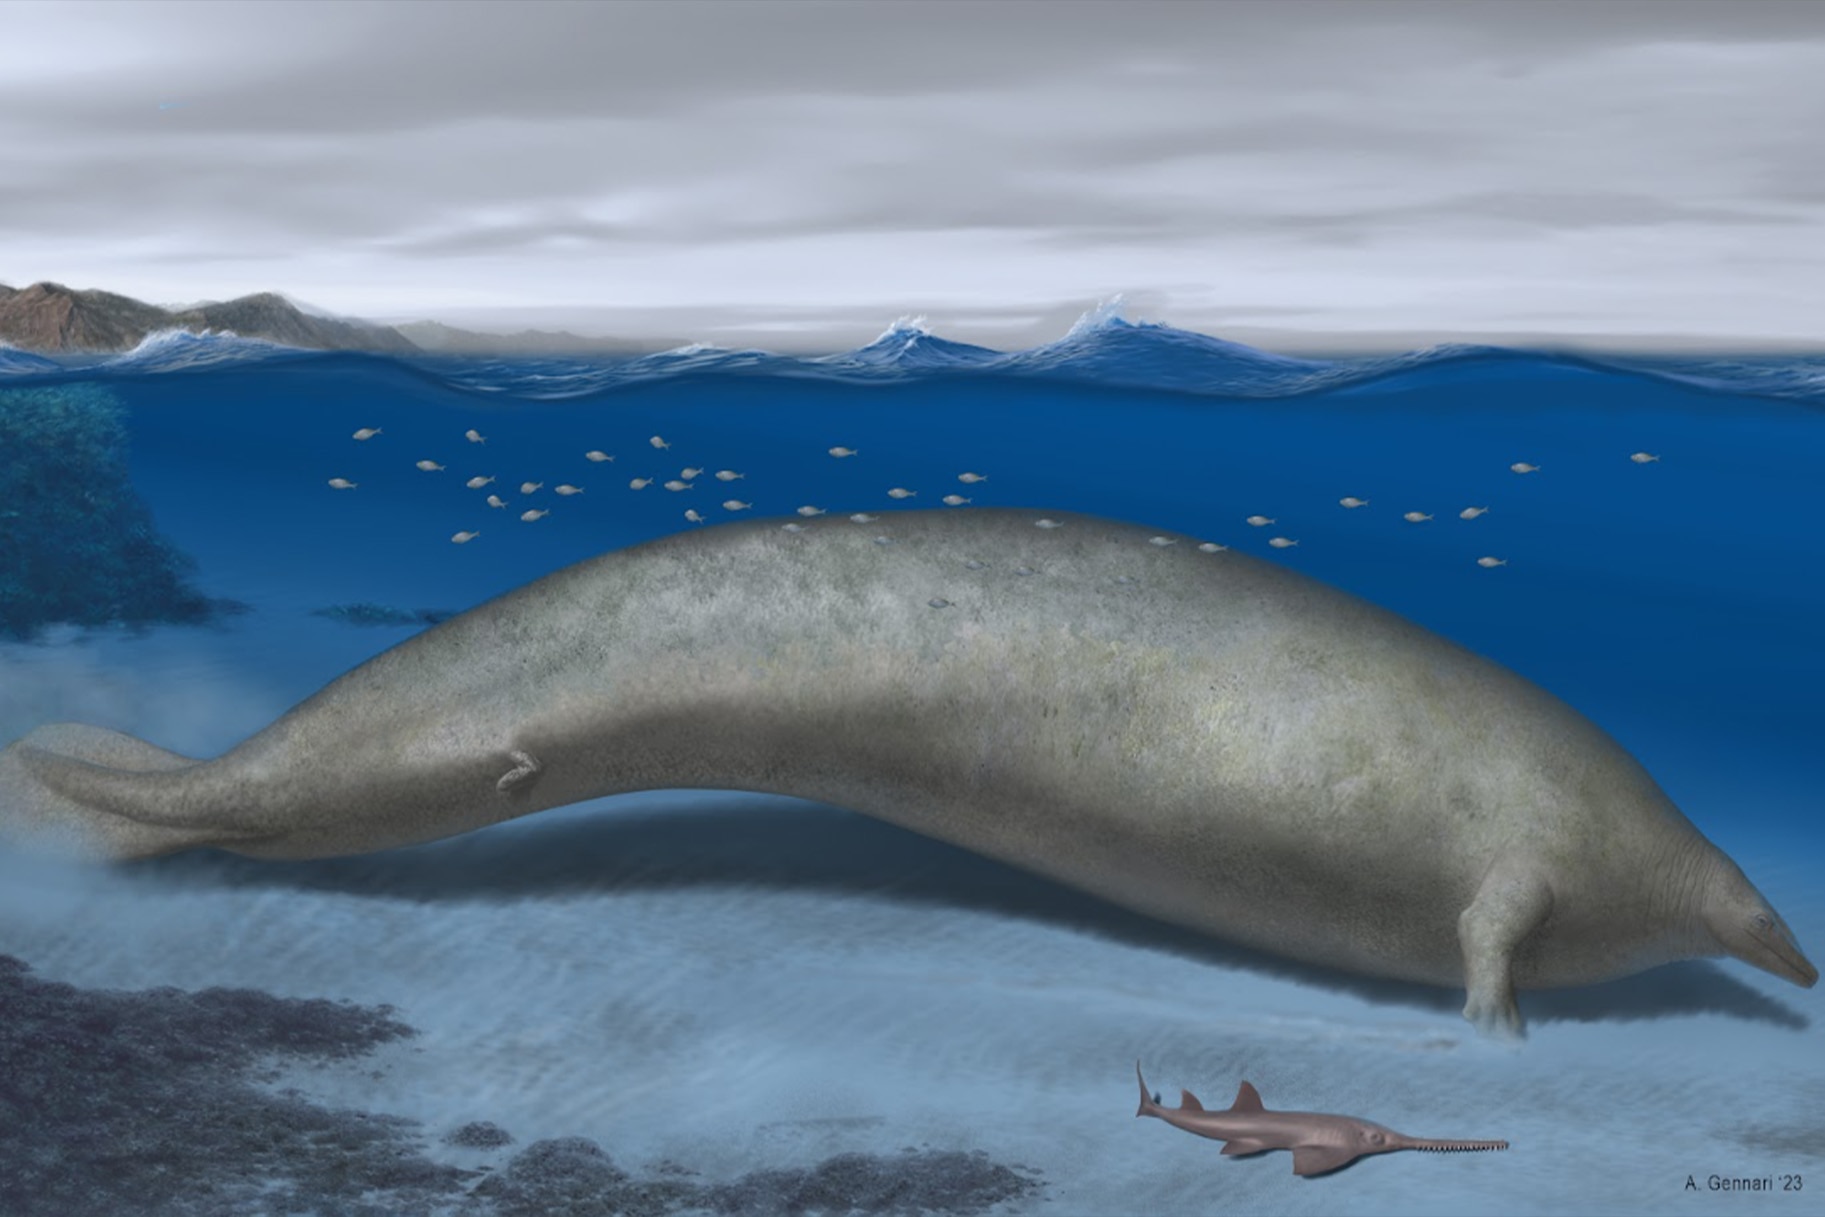 Artist's life rendering of Perucetus colossus